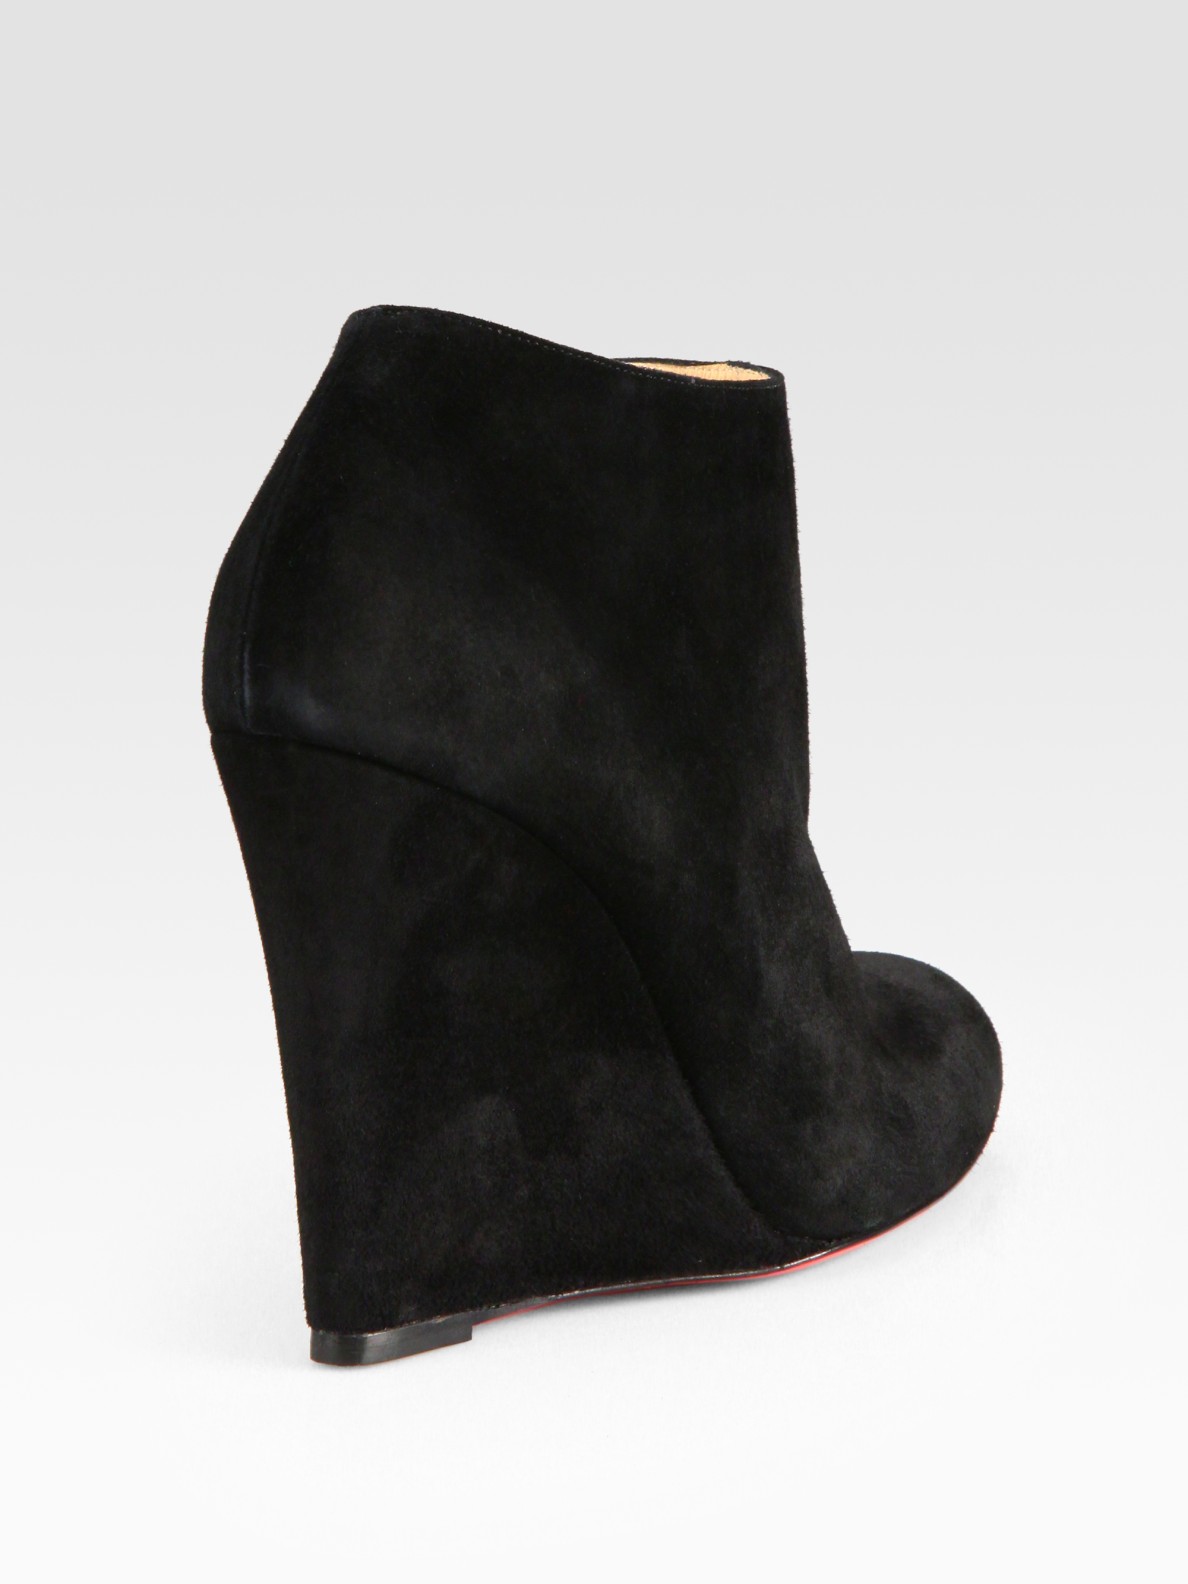 Christian louboutin Suede Wedge Ankle Boots in Black | Lyst